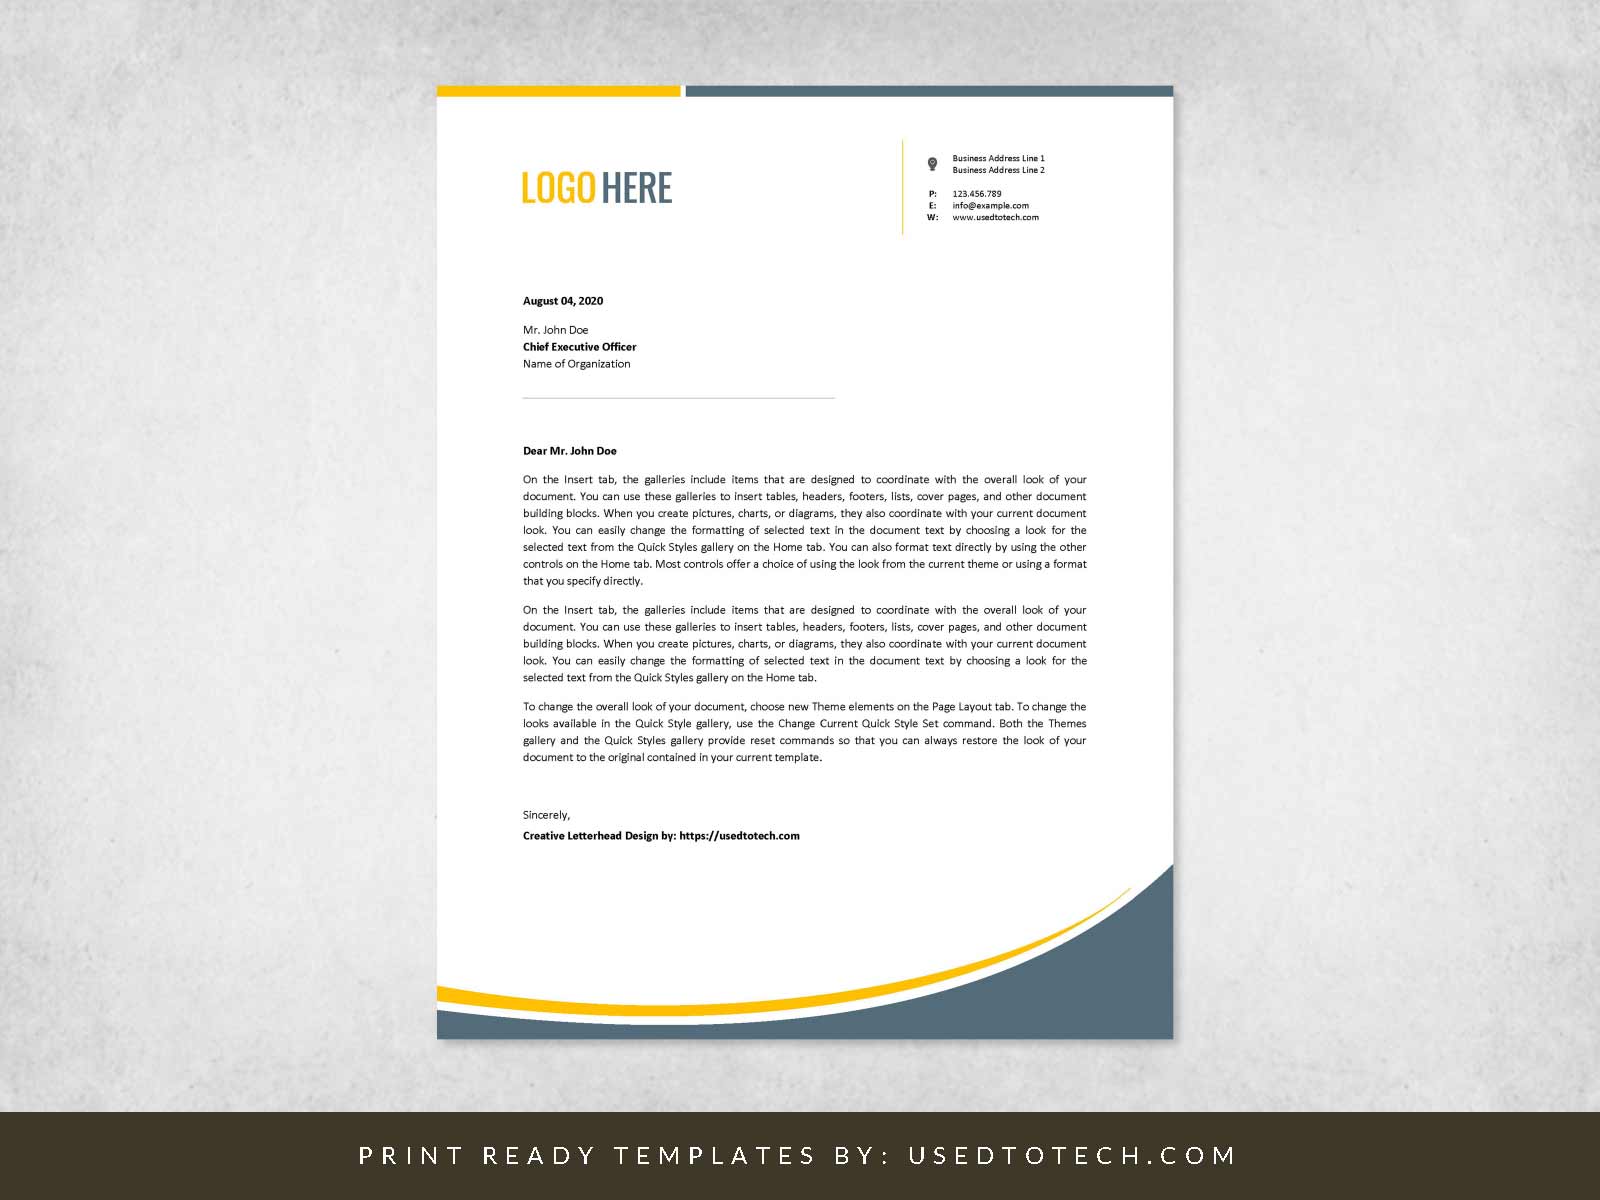 Word template for creative letterhead design - Used to Tech With Letterhead With Logo Template